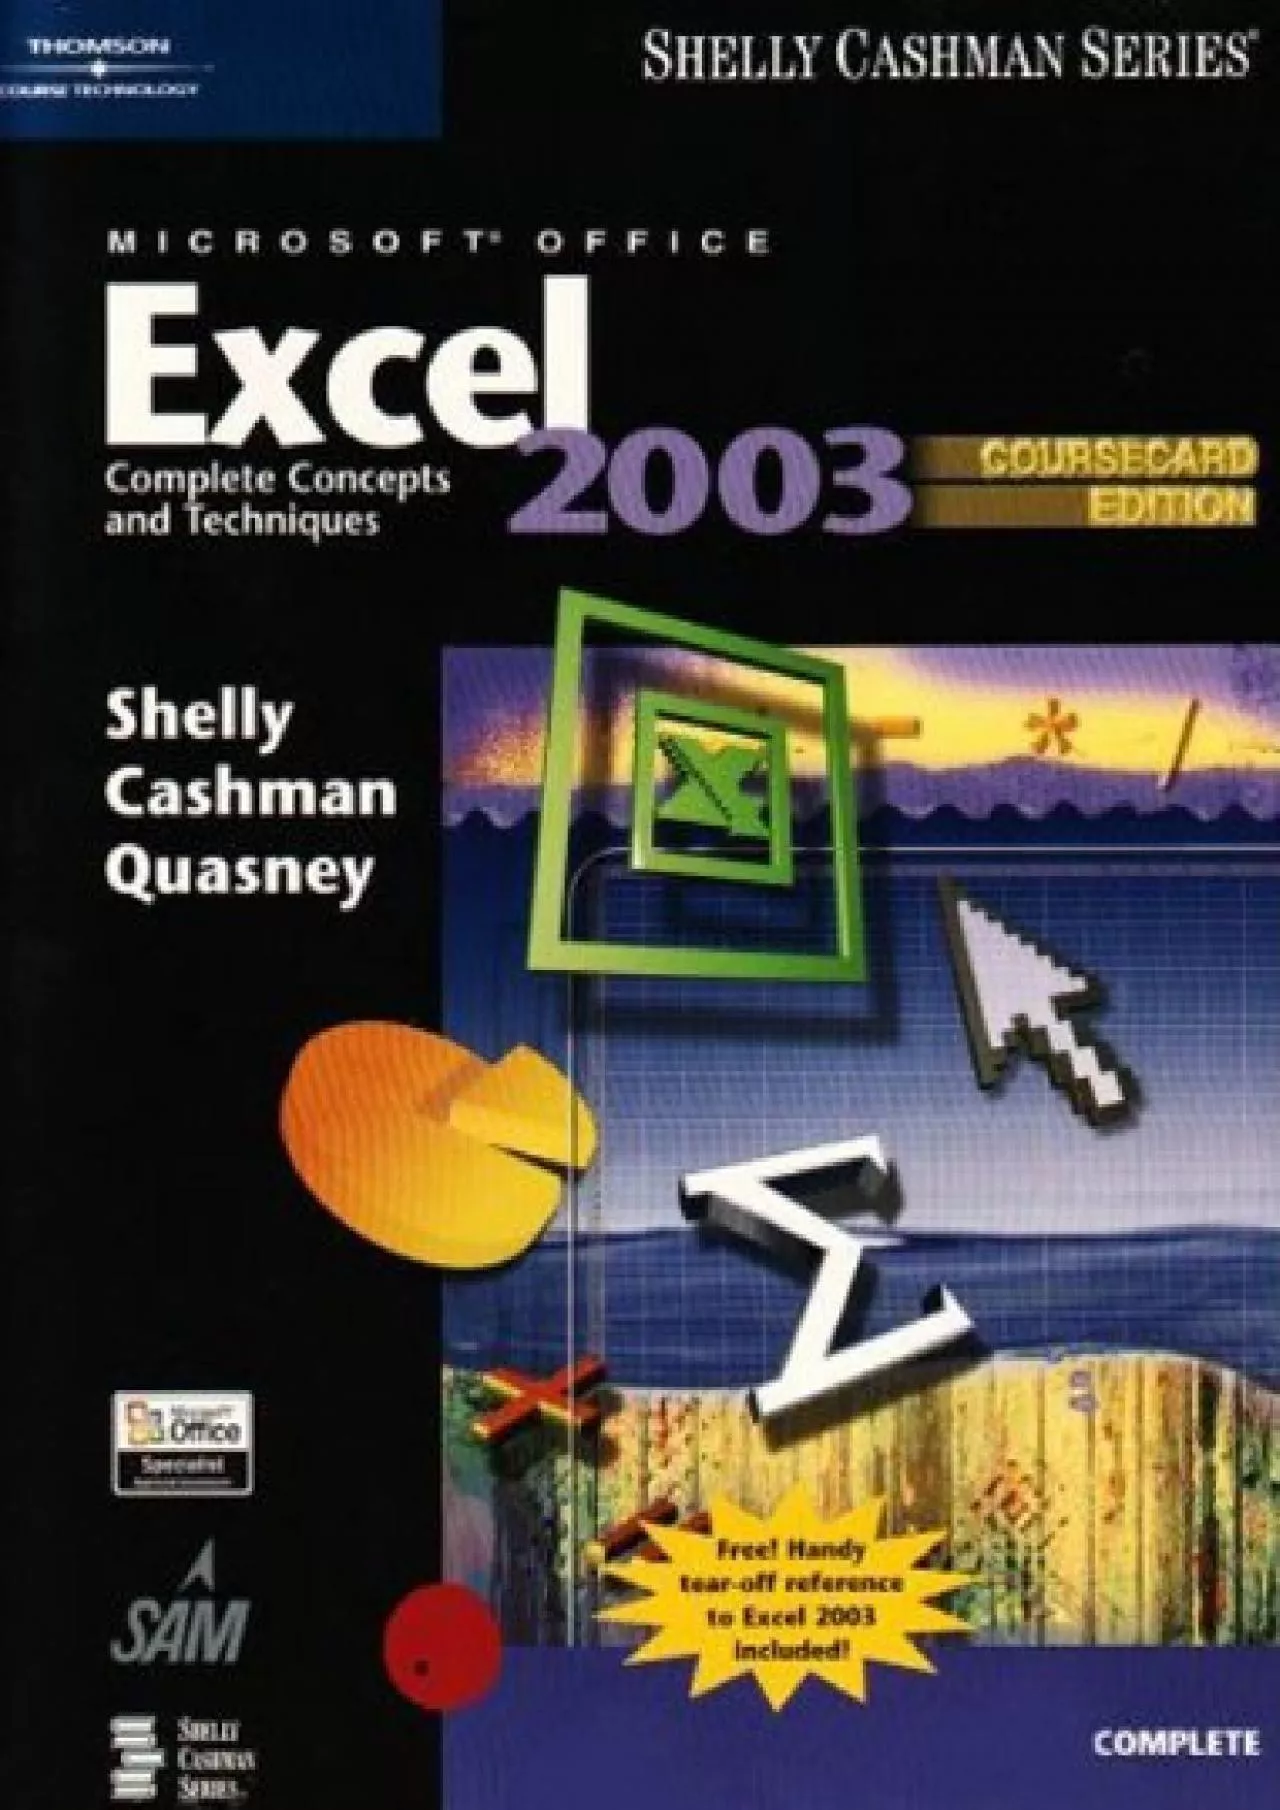 (BOOK)-Microsoft Office Excel 2003: Complete Concepts and Techniques, CourseCard Edition